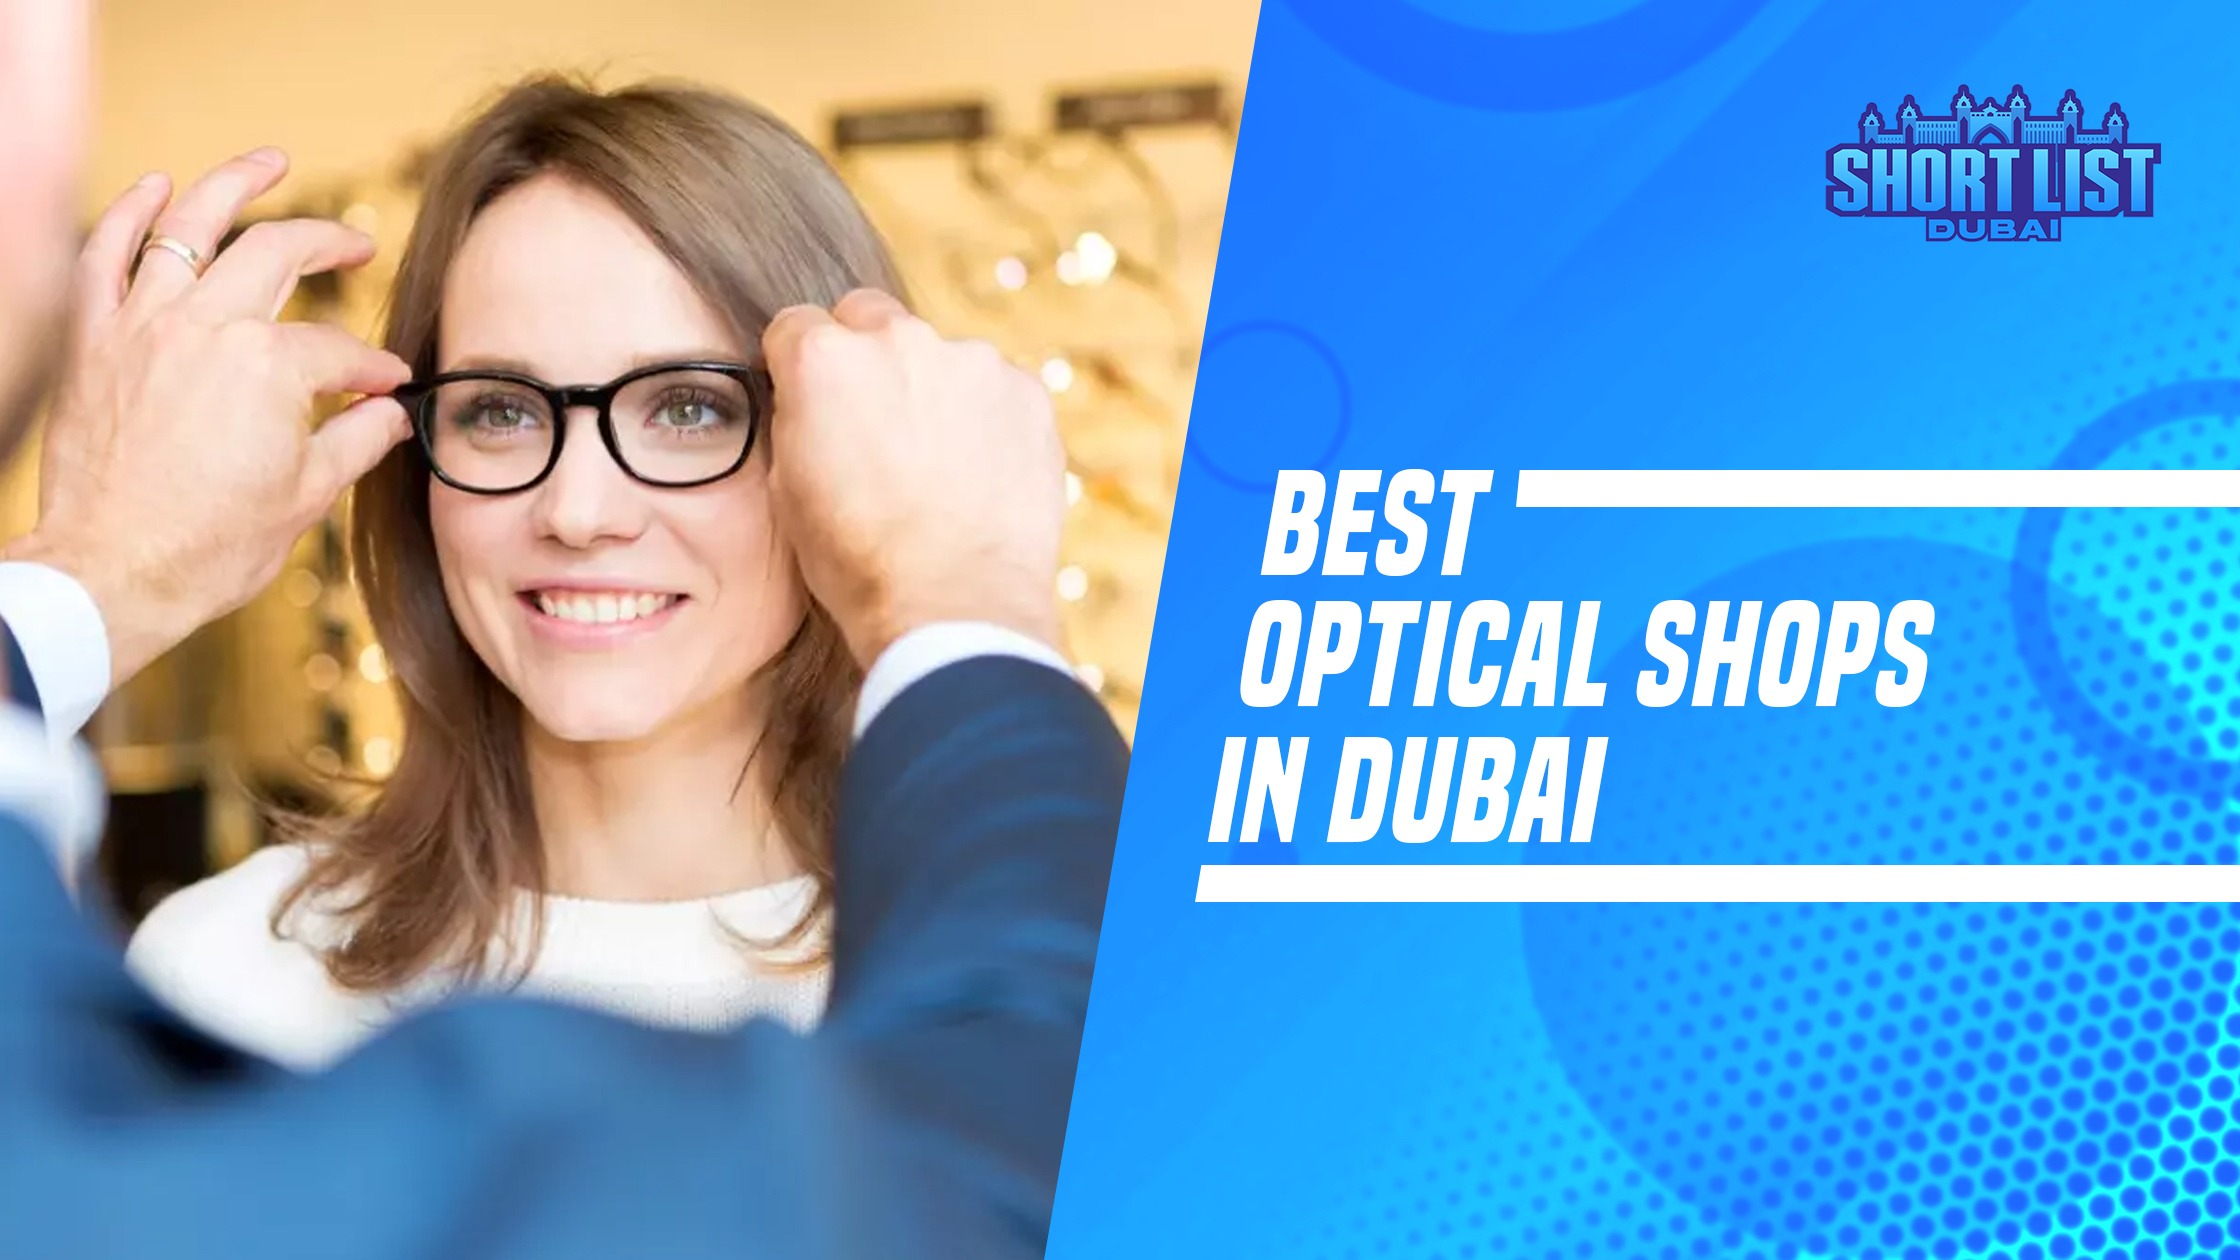 Best Optical Shops In Dubai – Top Customer-Rated Shops